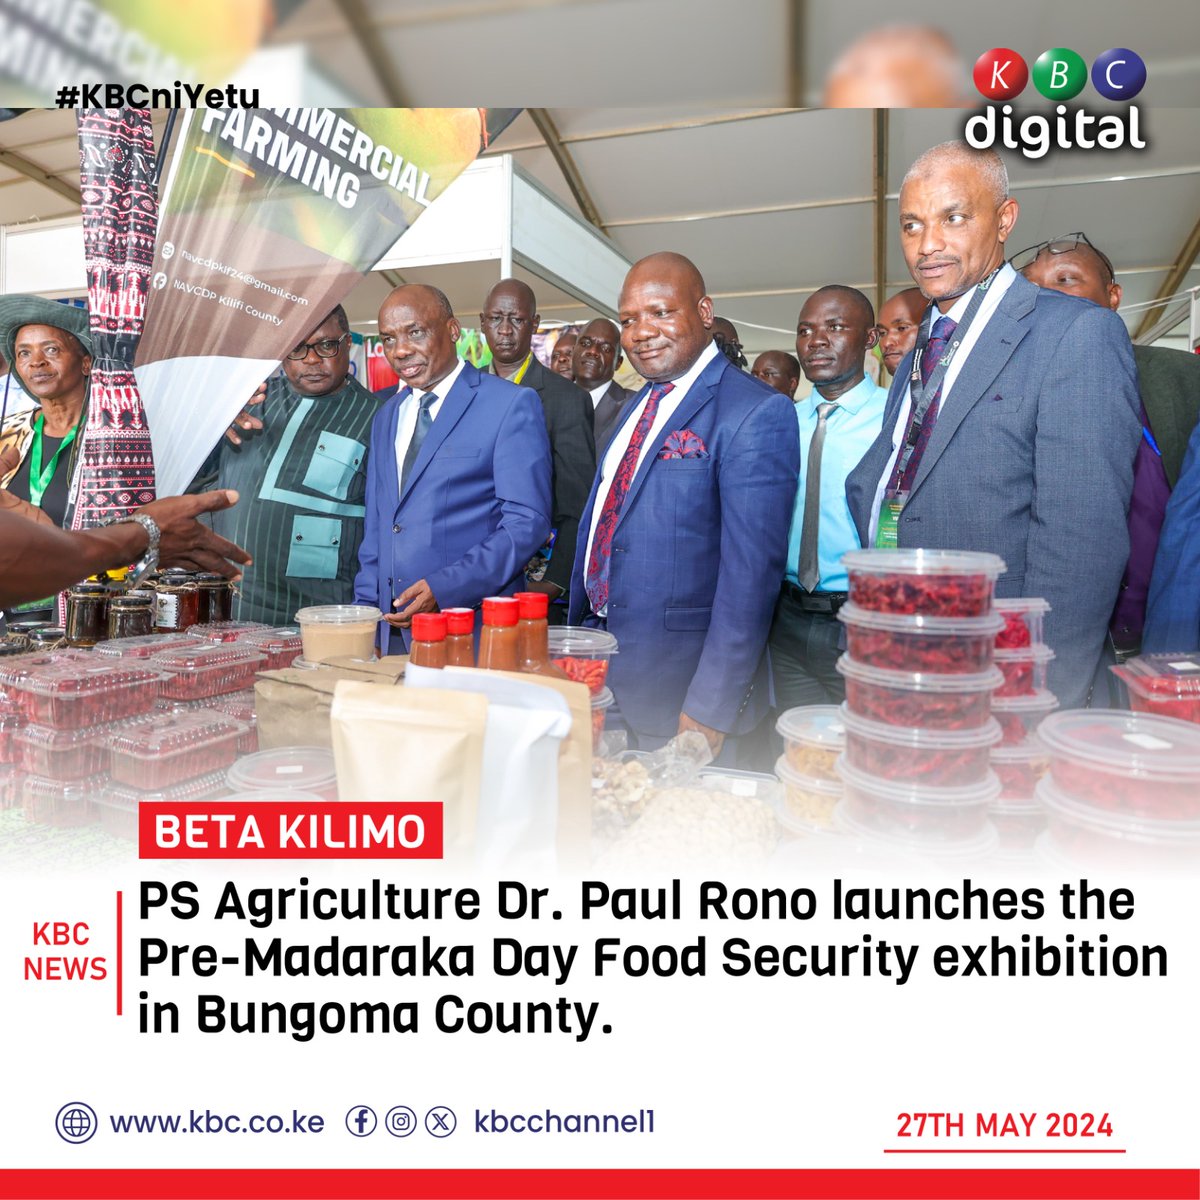 PS Agriculture Dr. Paul Rono launches the Pre-Madaraka Day Food Security exhibition in Bungoma County. #BETAKilimo